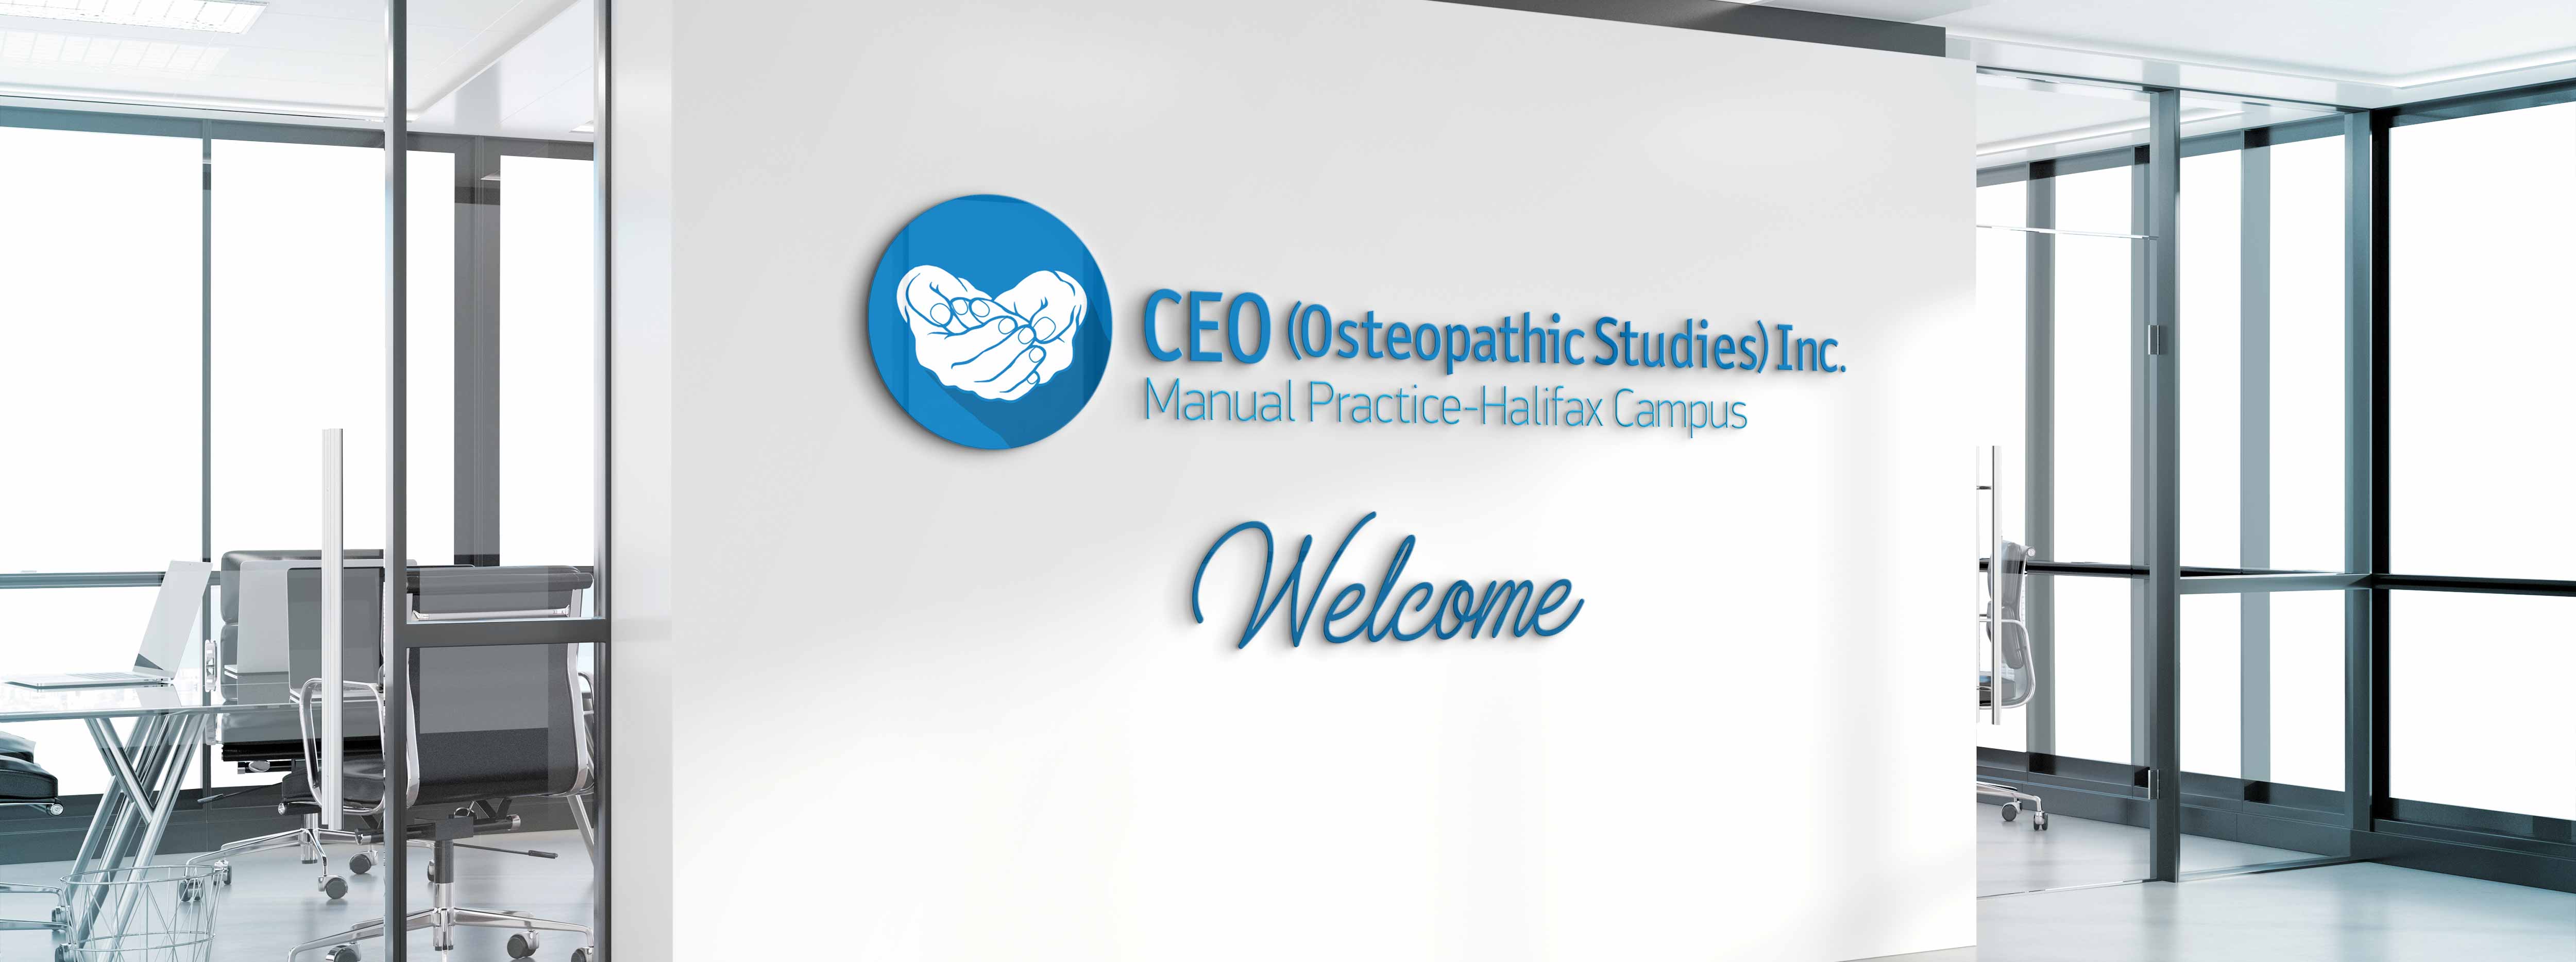 Welcome to the Osteopathic Studies —Manuel Pratice-Halifax Campus